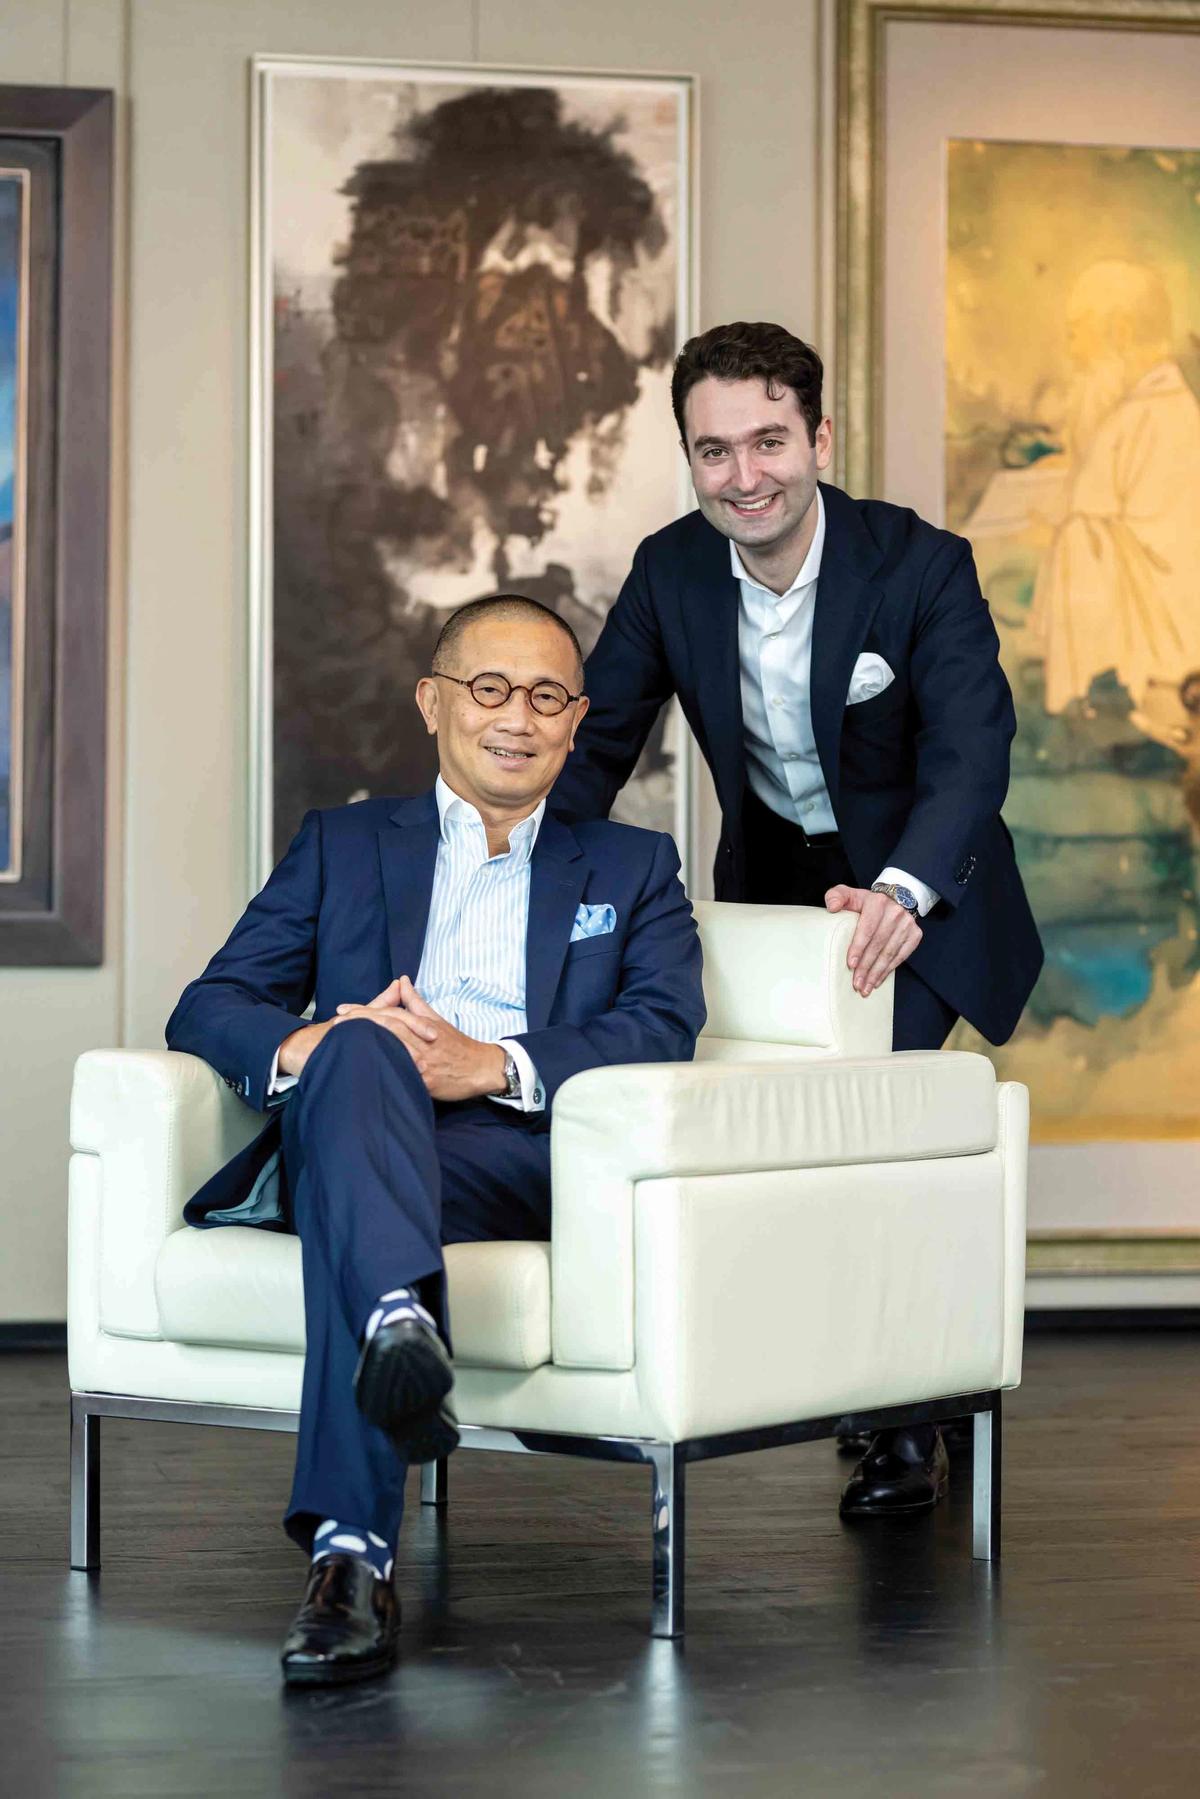 Kevin Ching with Nathan Drahi, 26, who replaces Ching as head of Asia at Sotheby's Courtesy of Sotheby's